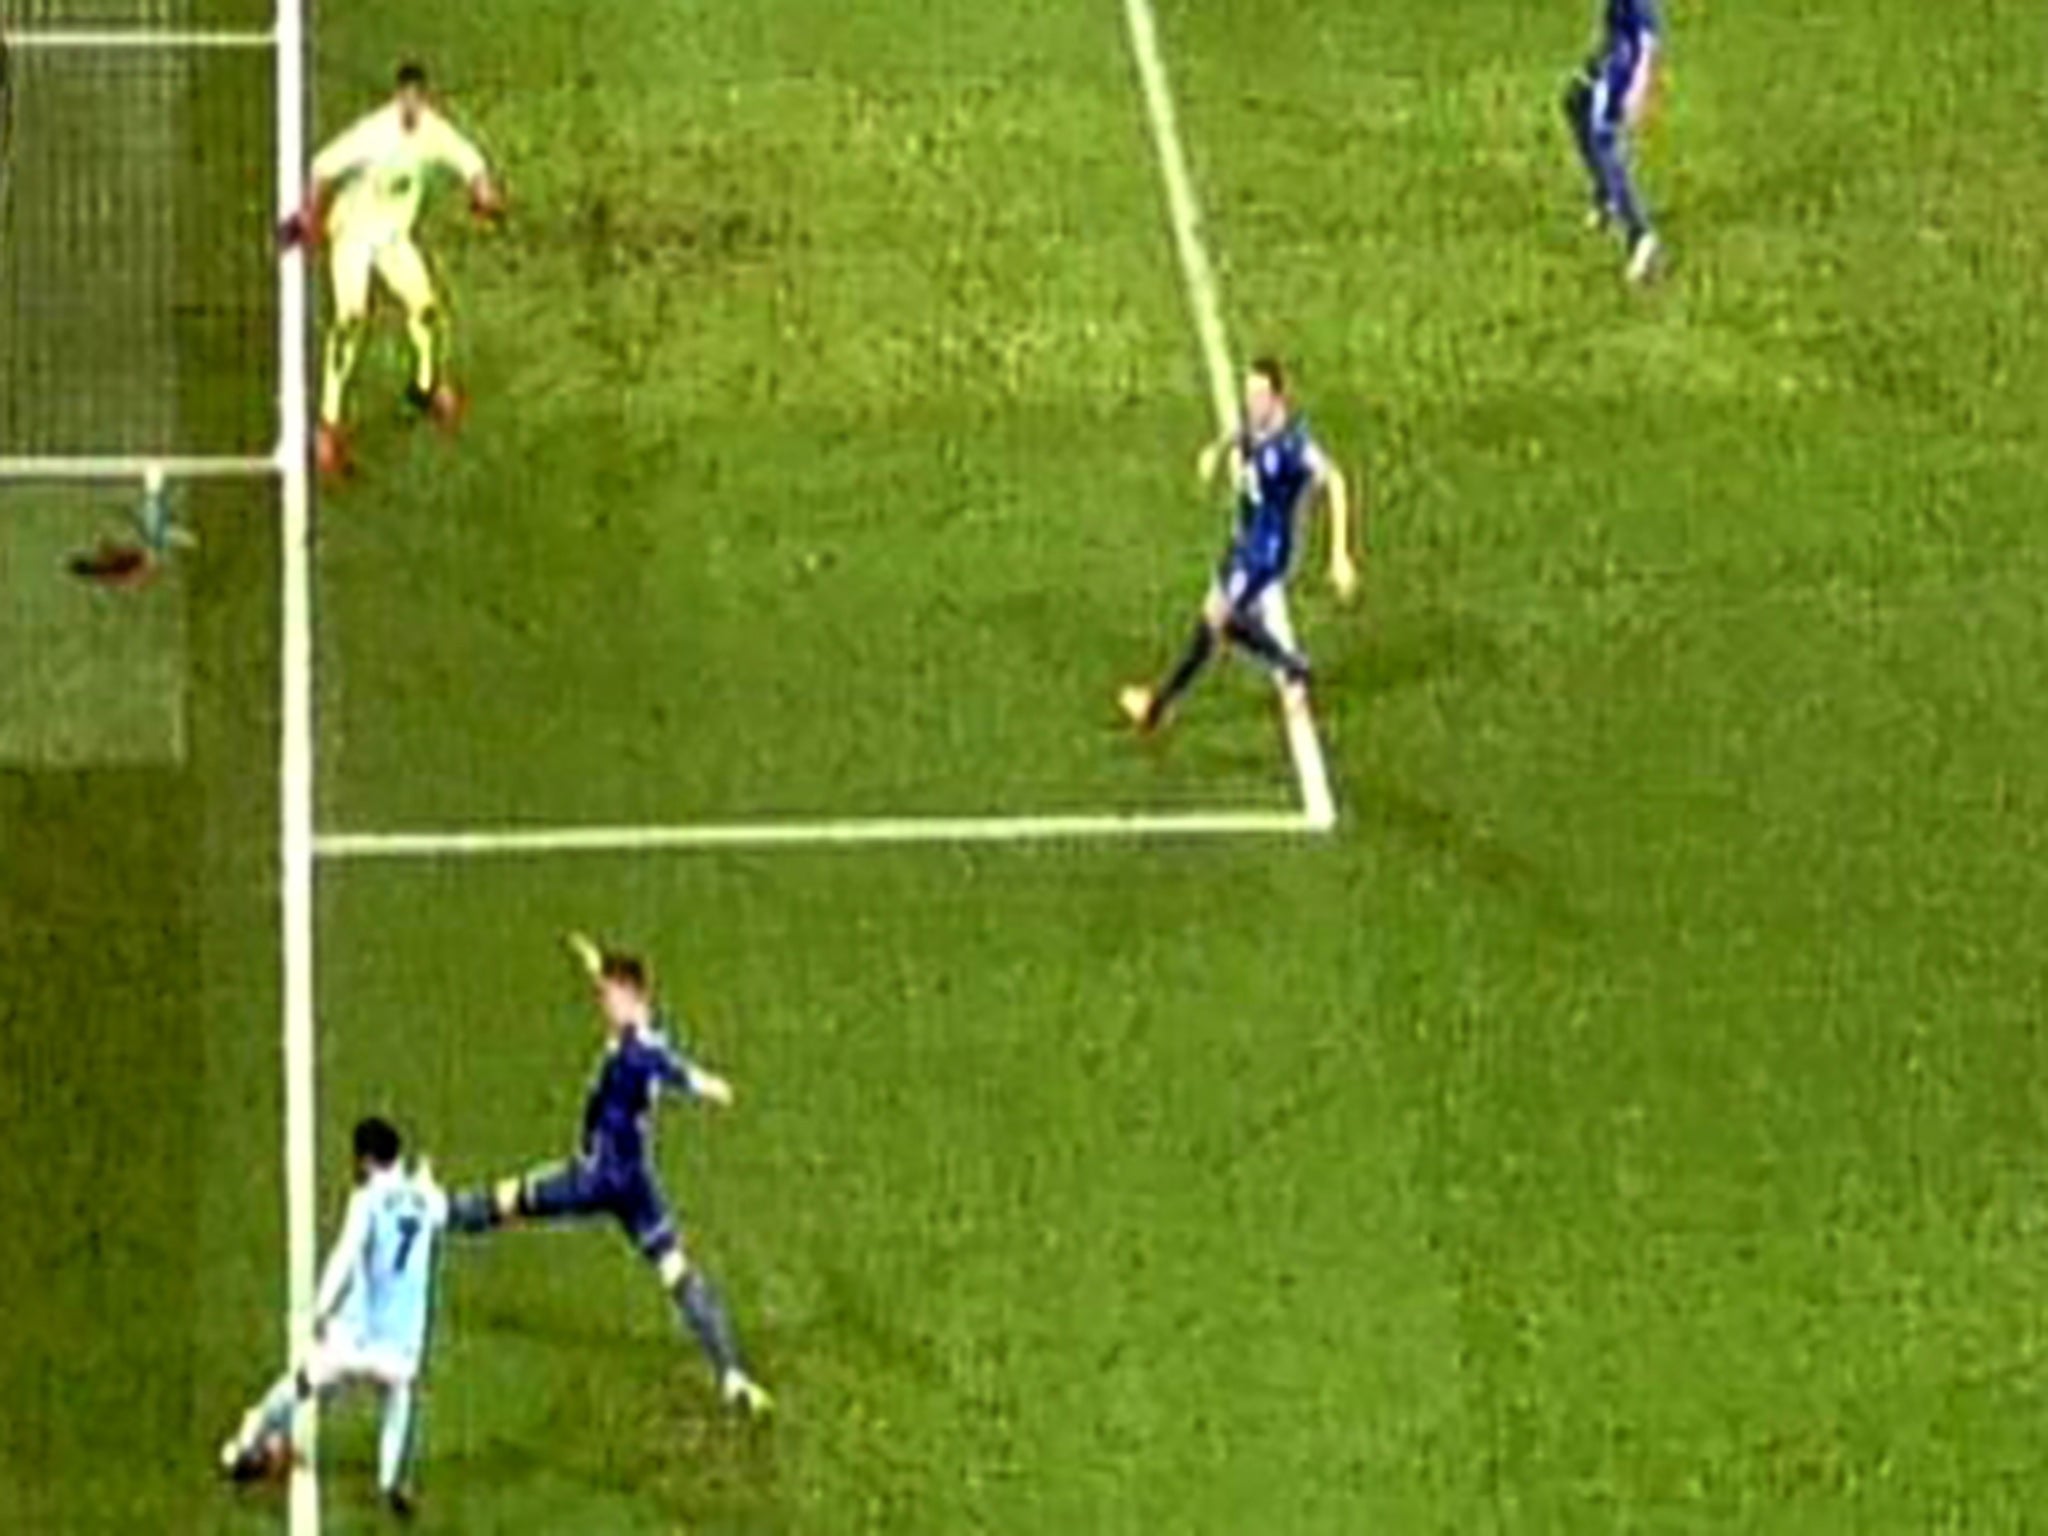 Replays showed the ball was out of play before Sterling cross